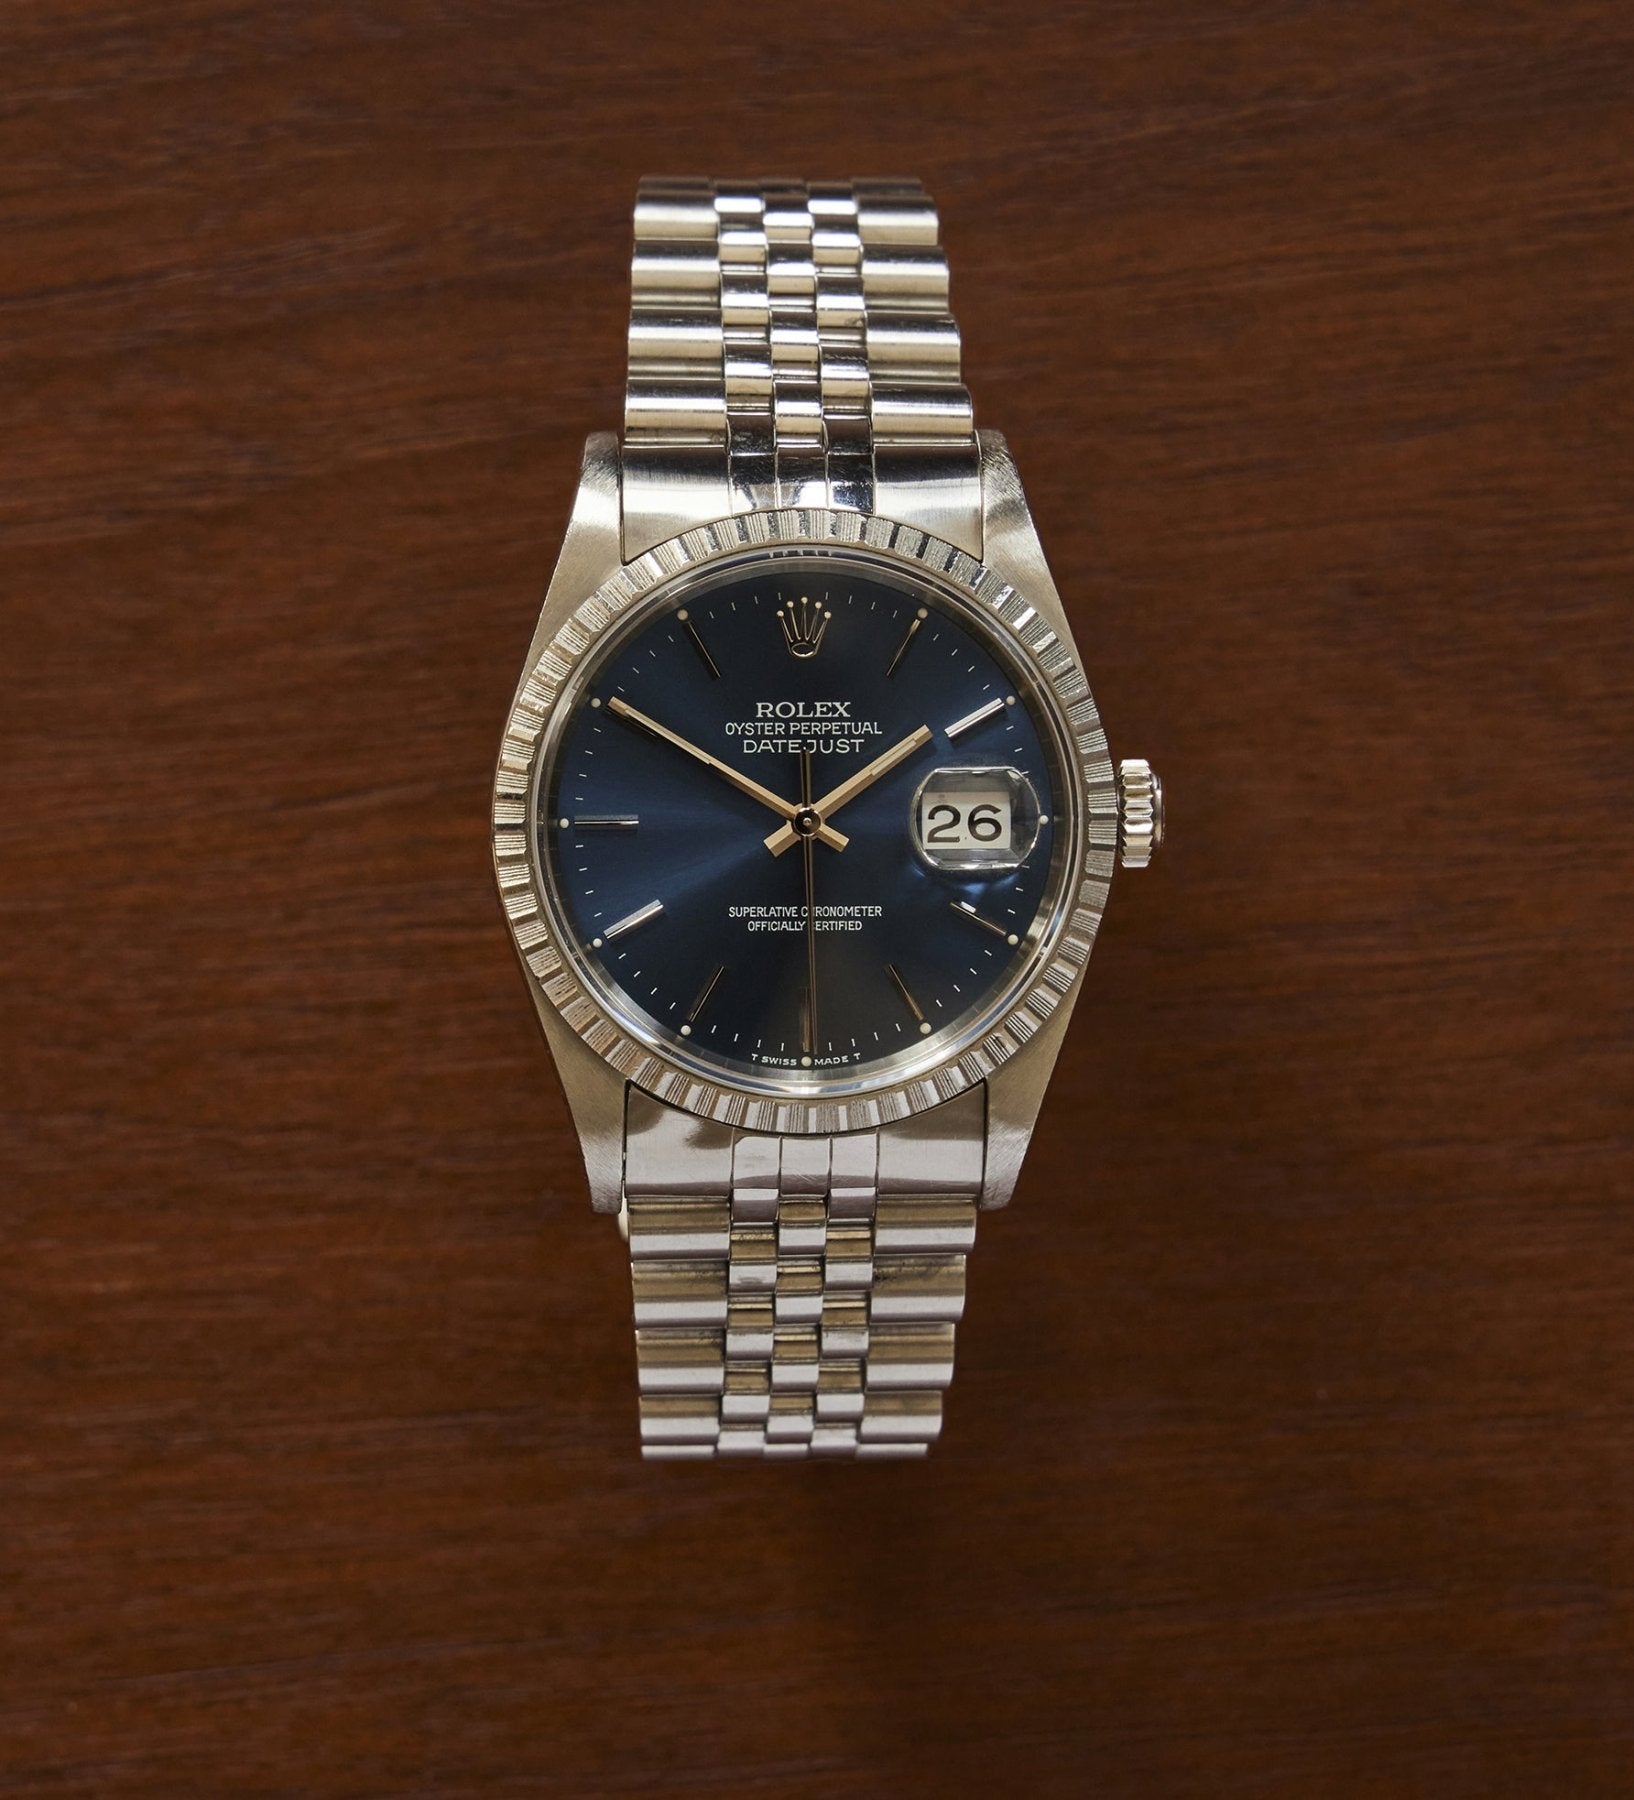 Rolex Oyster Perpetual Datejust Blue Dial Watch